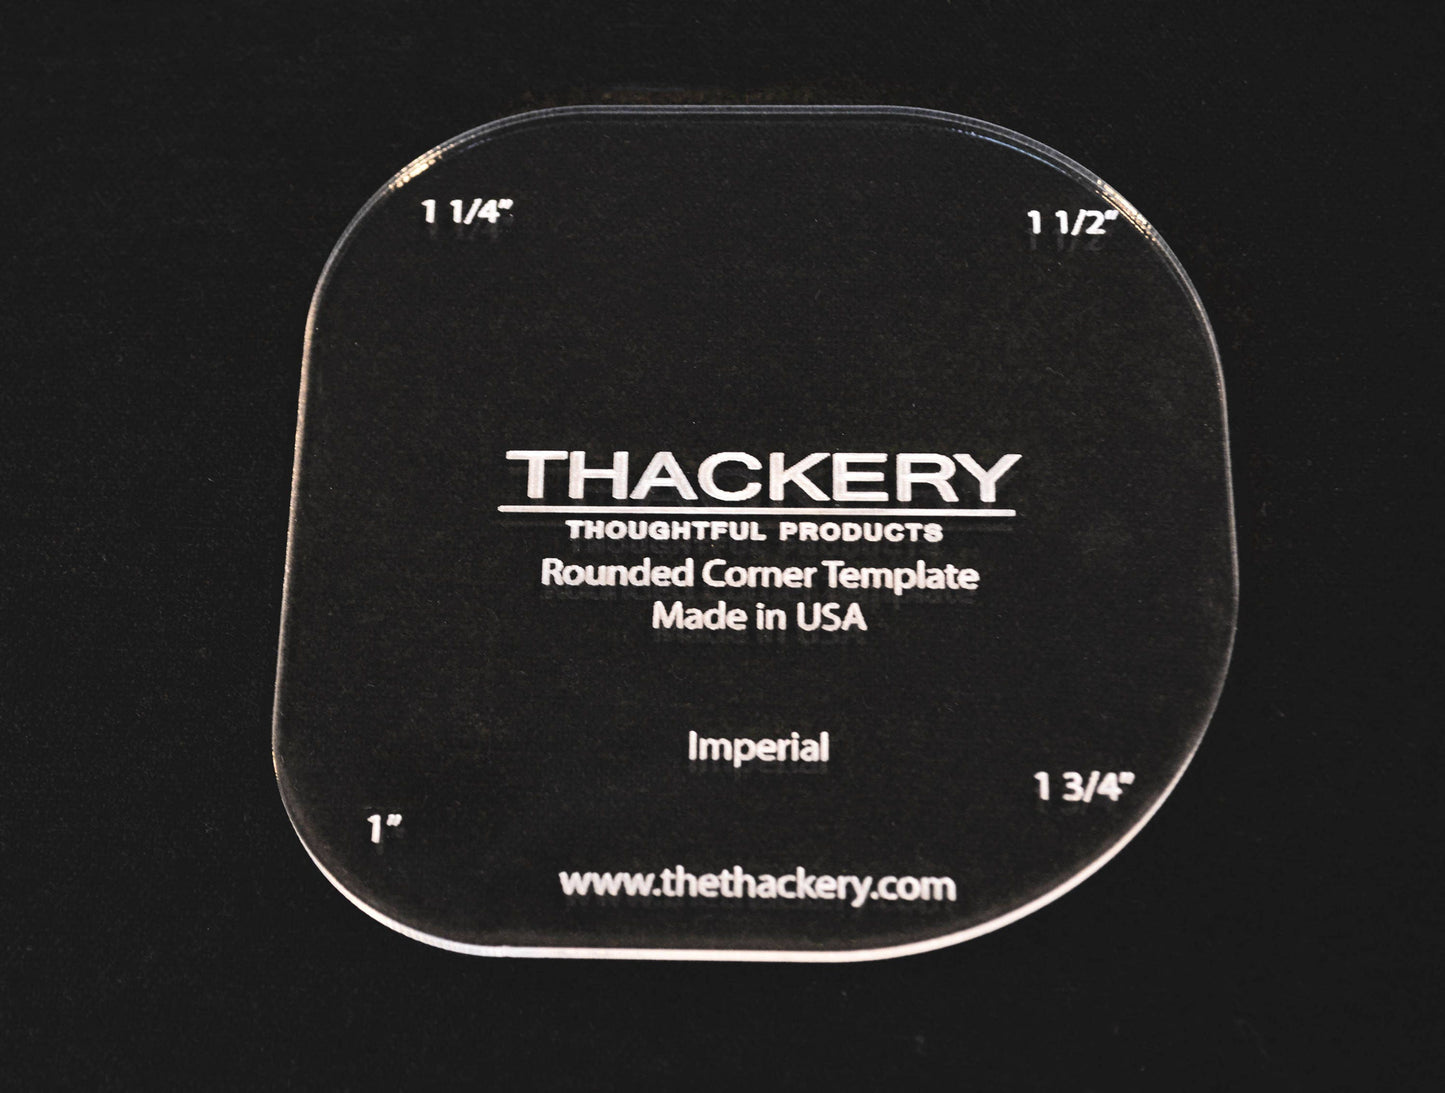 Thackery Rounded Corner Template - INCHES - complete set of 3 templates - 12 sizes